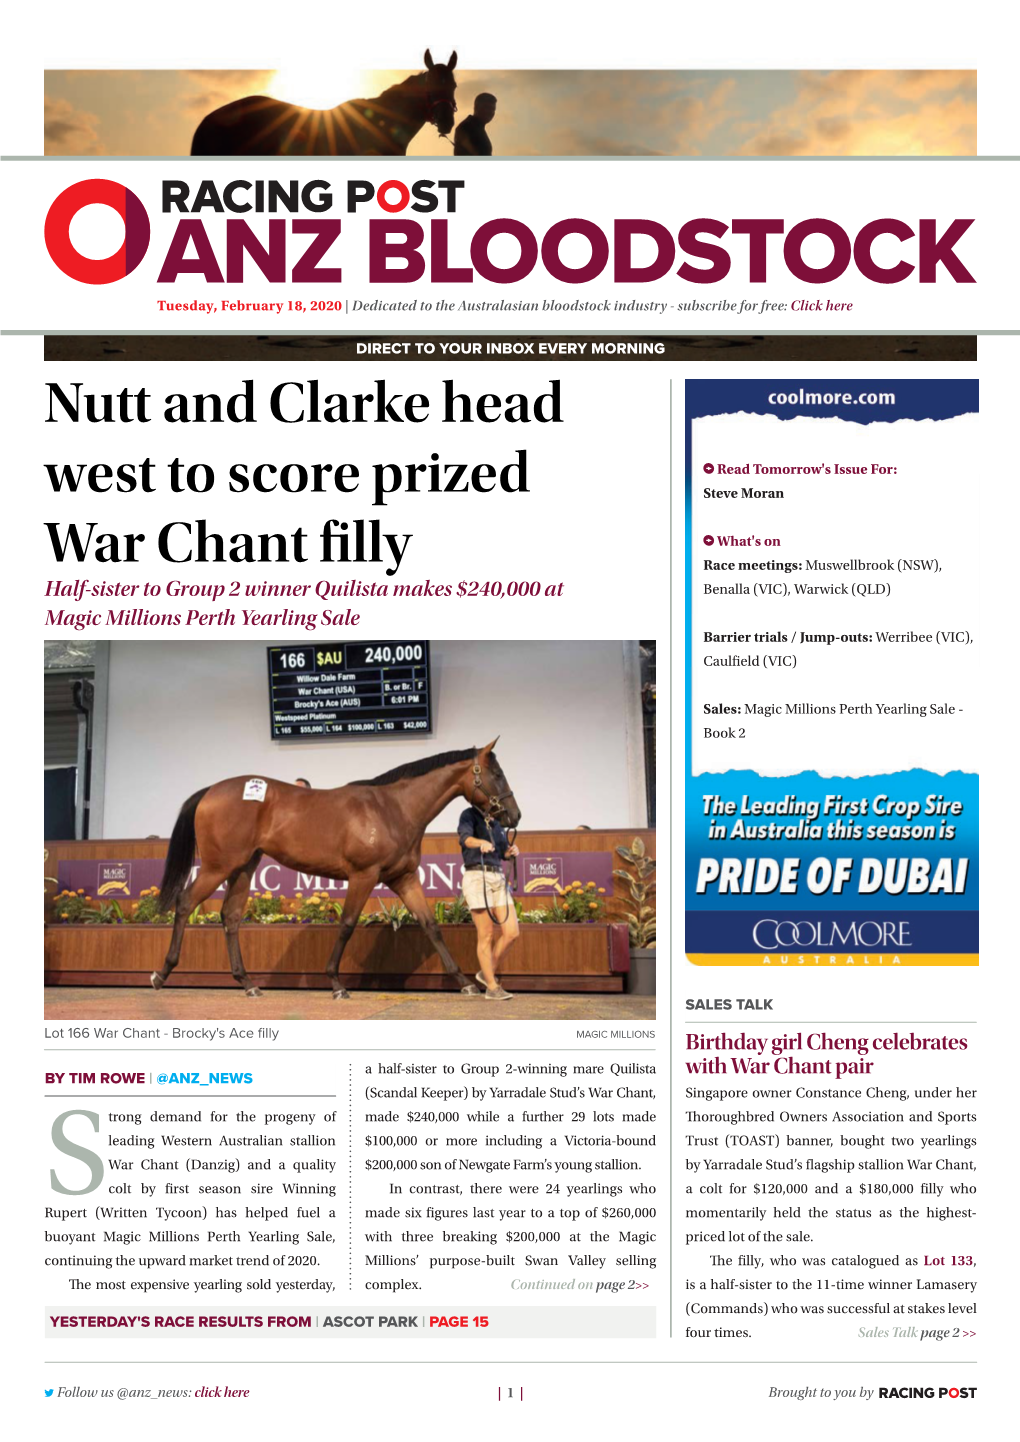 Nutt and Clarke Head West to Score Prized War Chant Filly | 2 | Tuesday, February 18, 2020